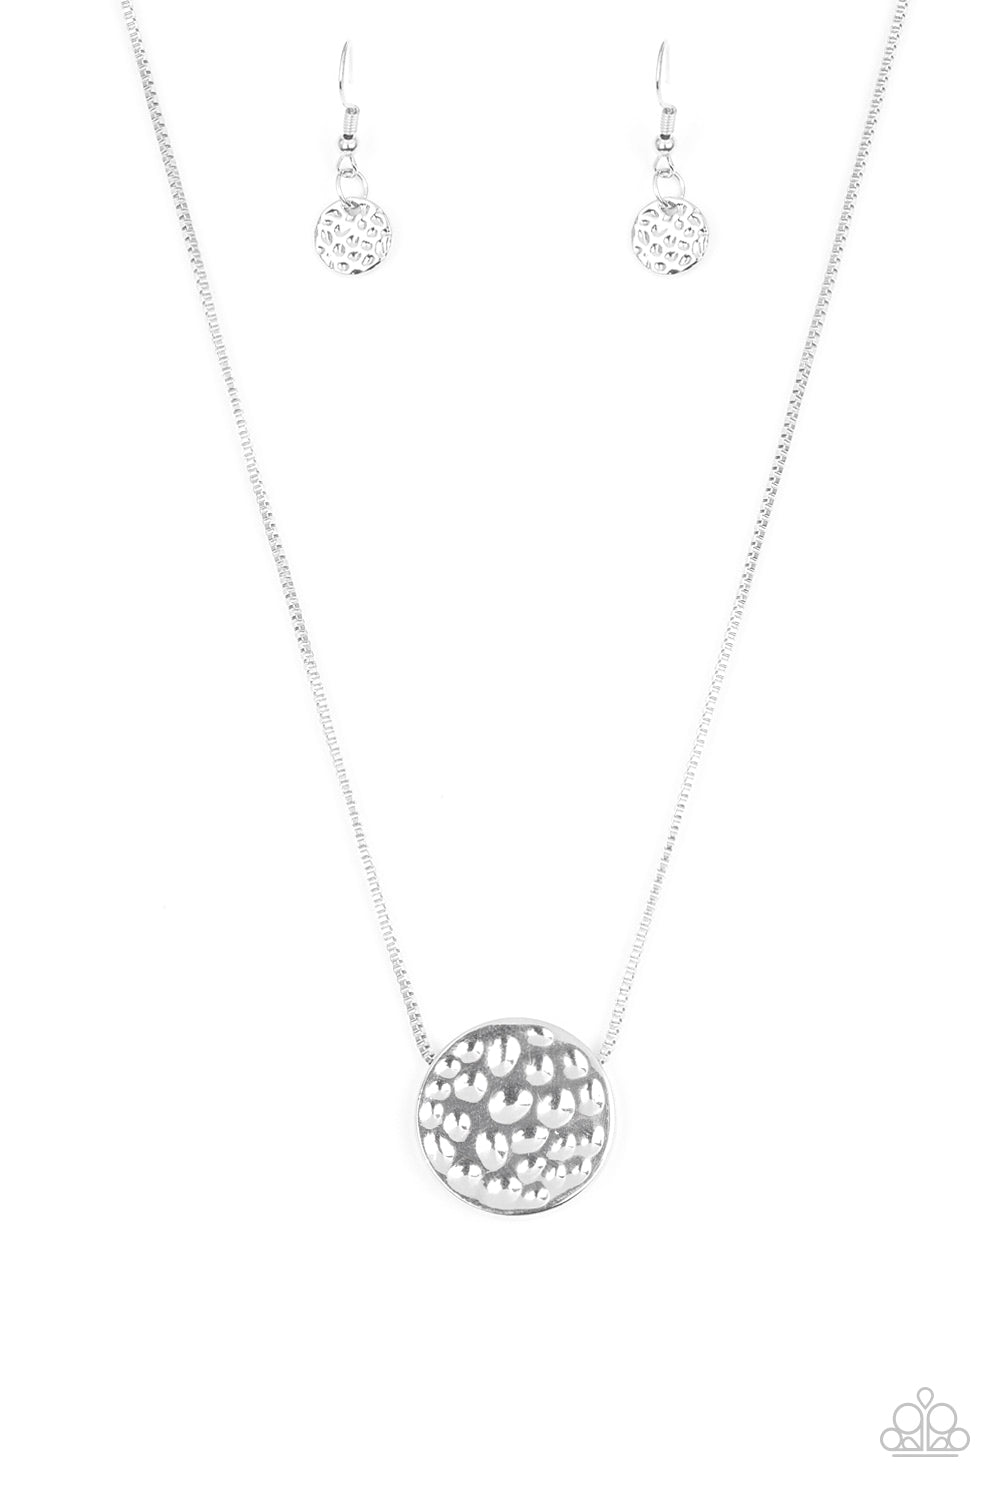 Paparazzi Necklace - The BOLD Standard - Silver